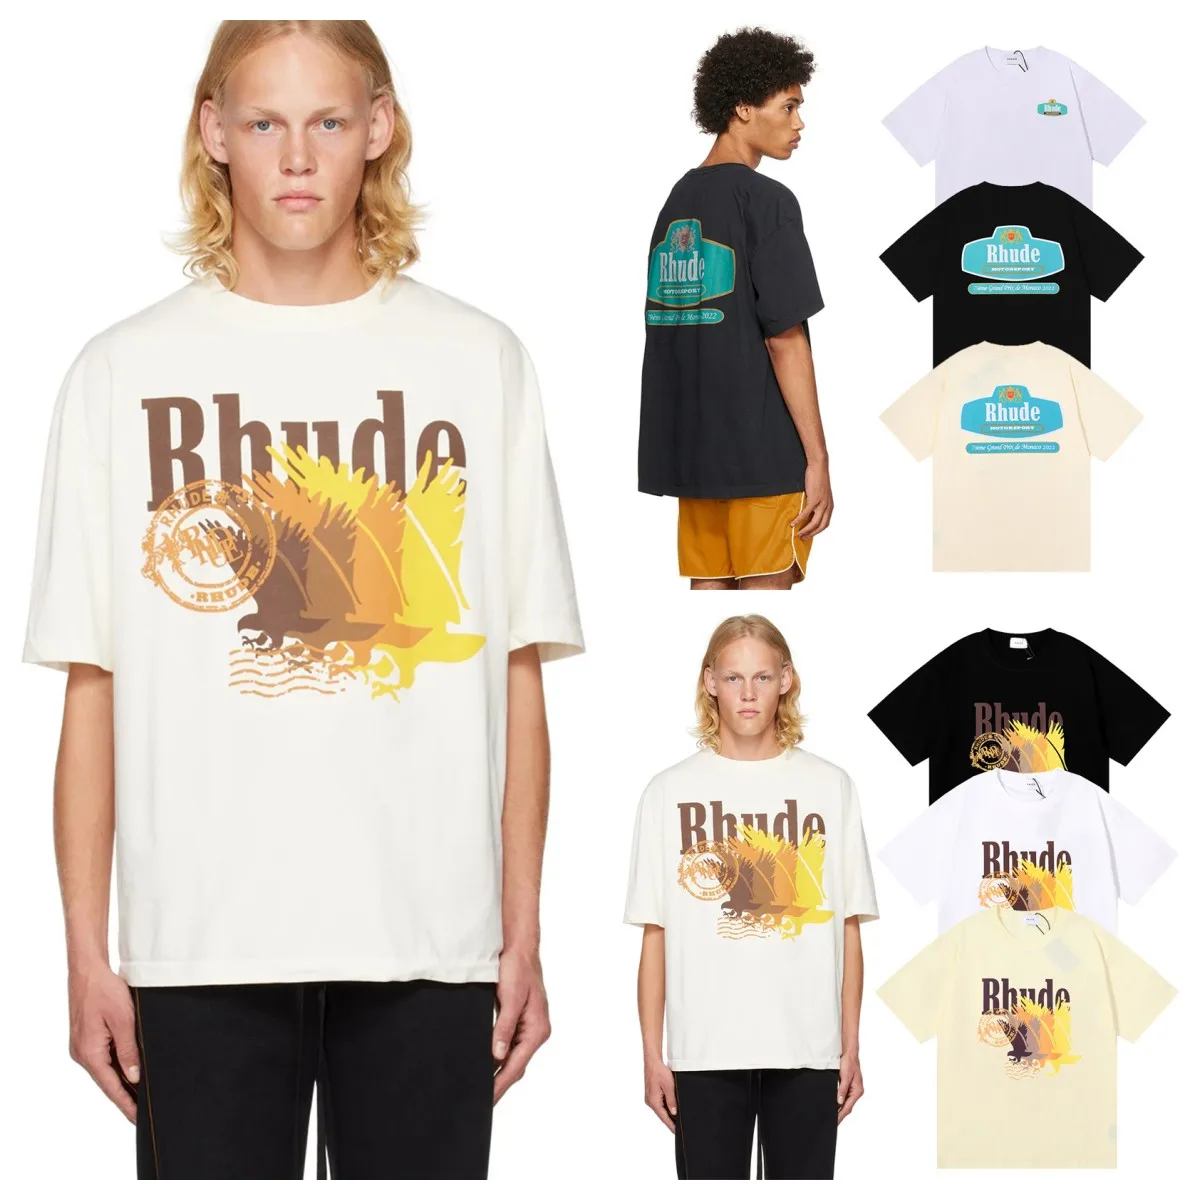 

RHUDE New T-shirt Postage Gradient Pattern Print High Quality Double Yarn Cotton Short Sleeve Top for Men Women